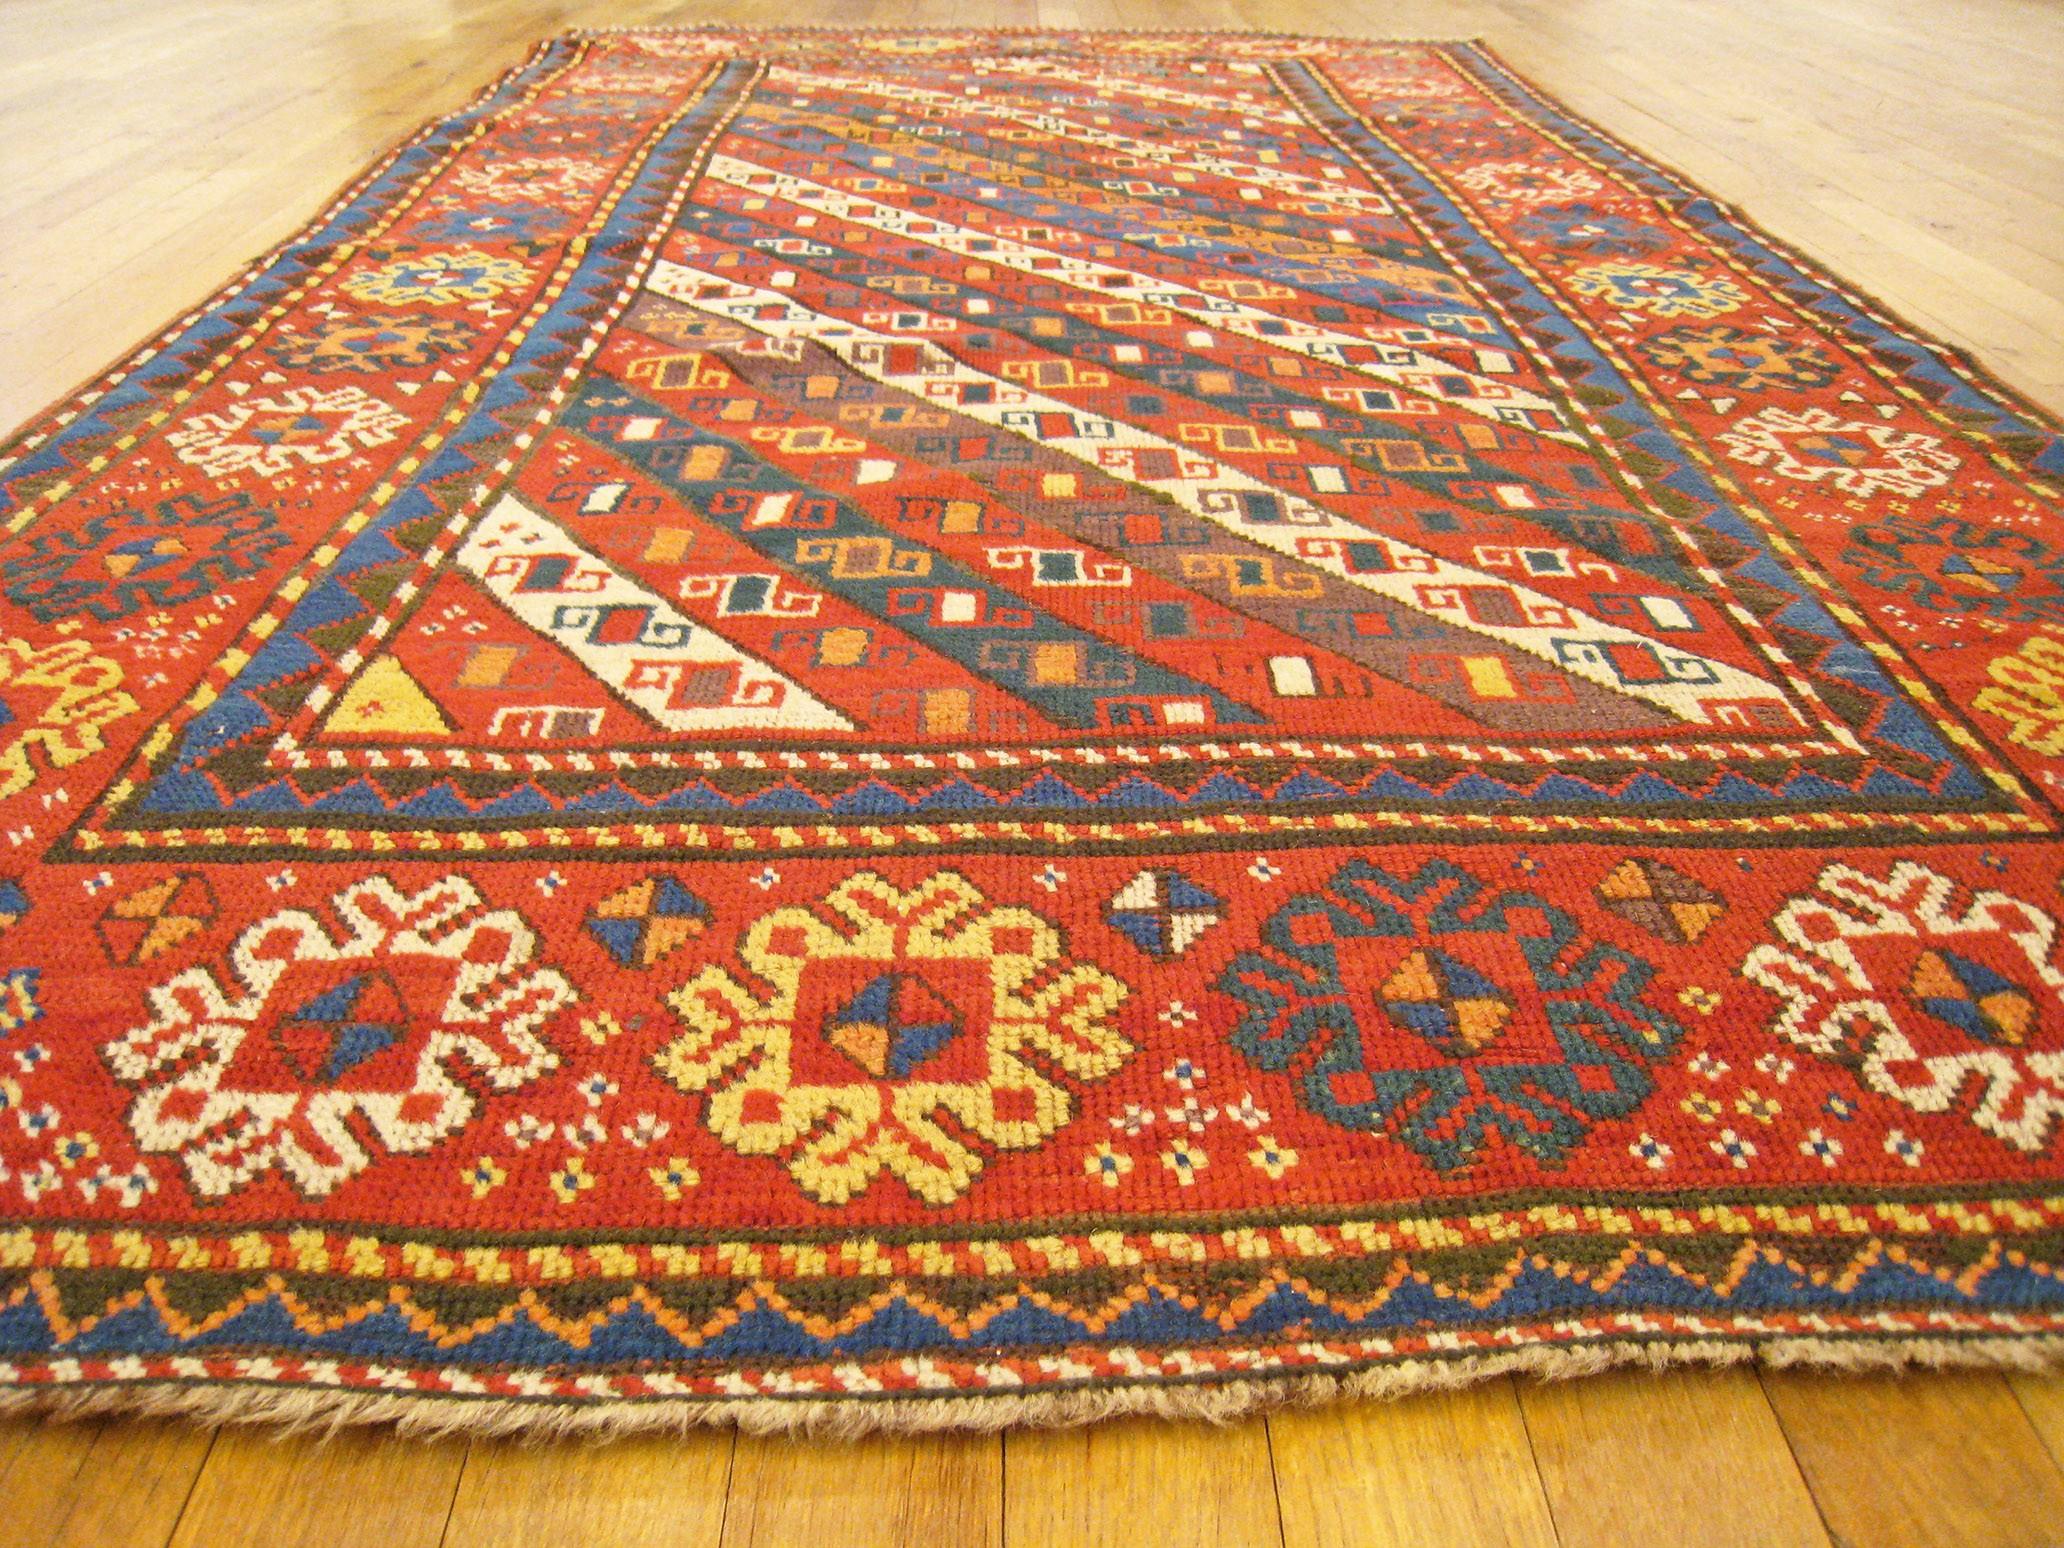 Late 19th Century Antique Caucasian Gendje Oriental Rug in Runner Size with Diagonal Stripes For Sale